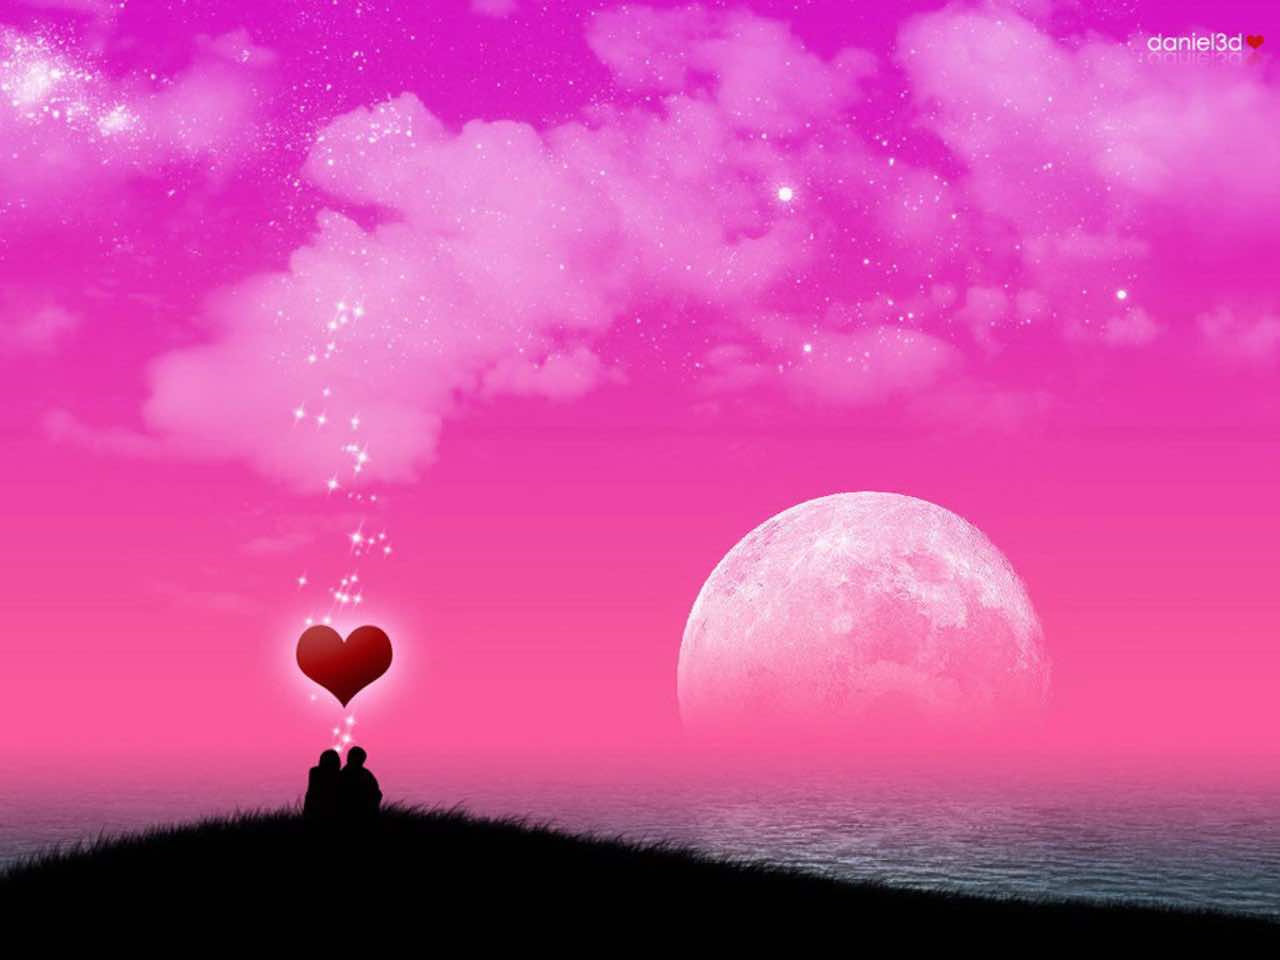 100 High Def Romantic Wallpapers For People With Love And Hearts